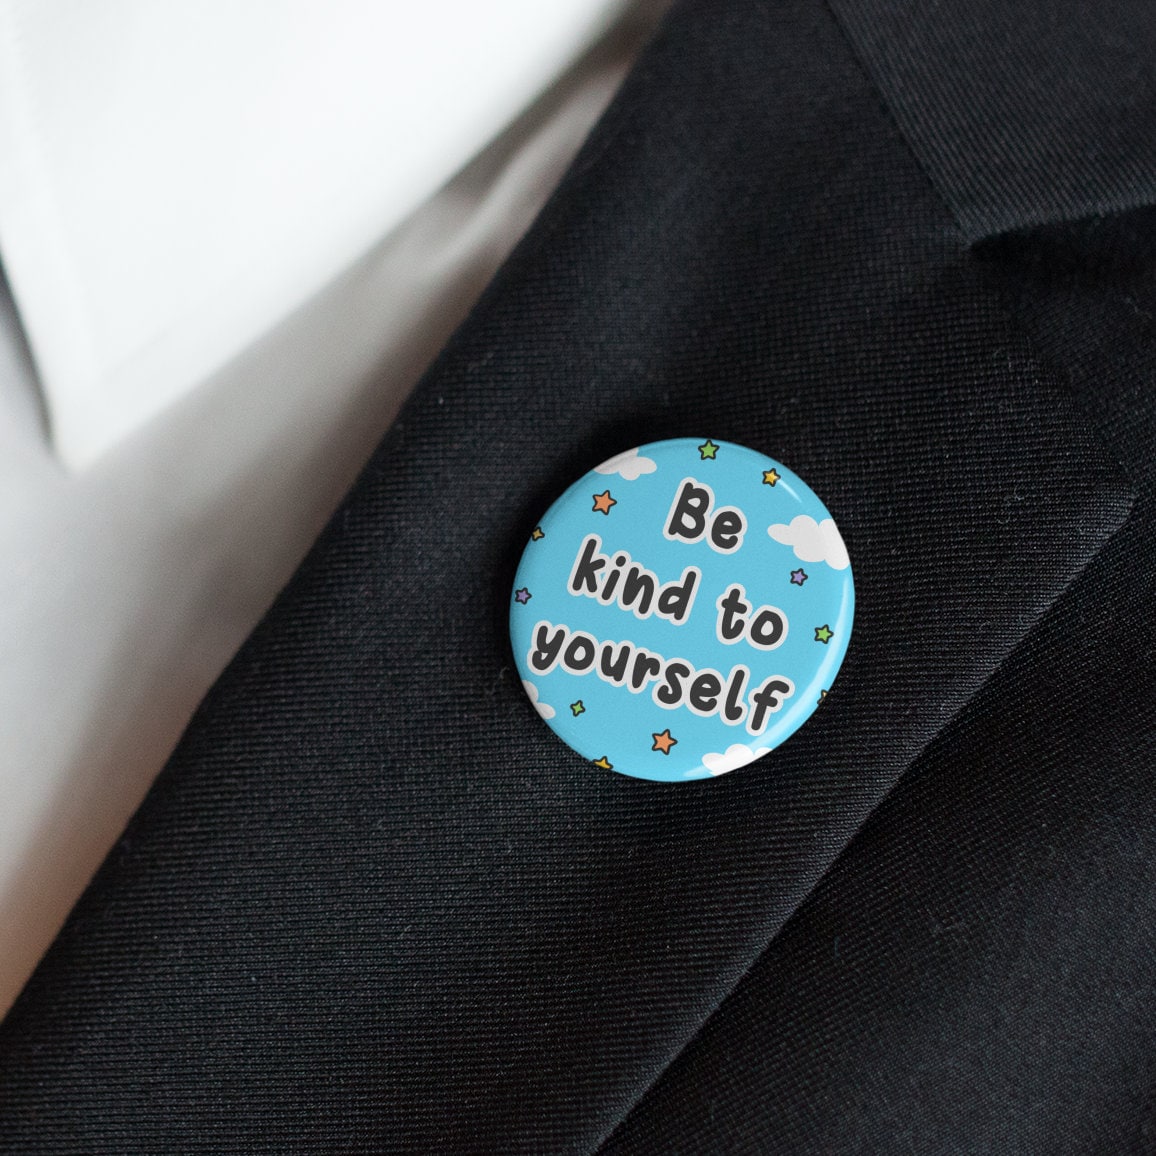 Be Kind To Yourself Pin Badge | Self Love - Self Care Quote - Be Kind - Be Yourself